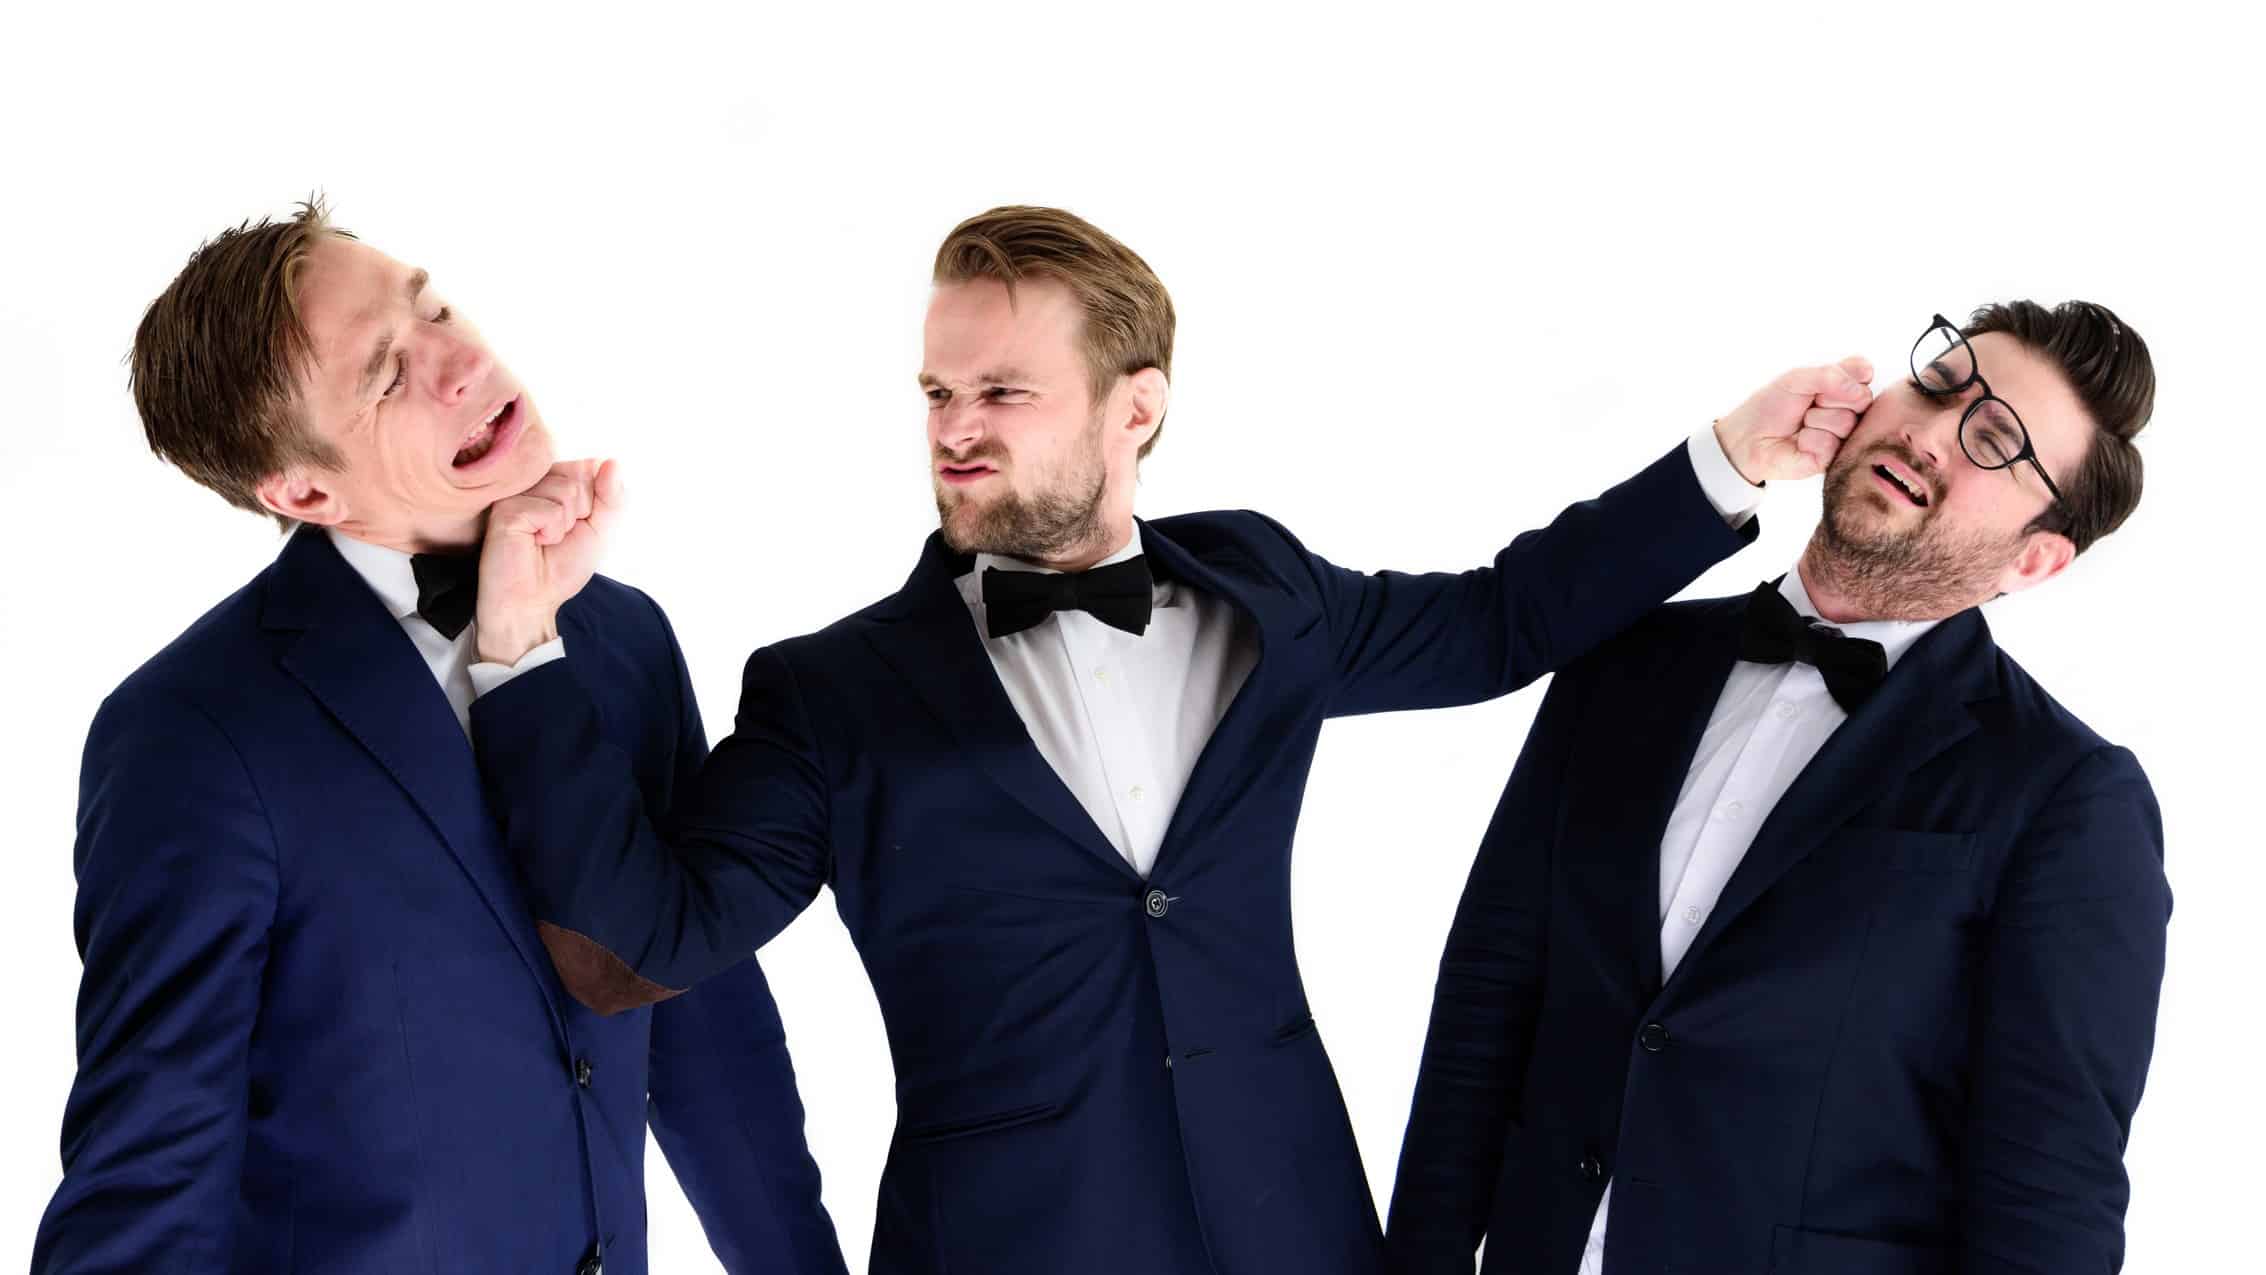 A group of three young men in dinner suits lark around with the one in the middle pretending to deliver blows to the faces of his companions while they make exaggerated expressions of pain and suffering.